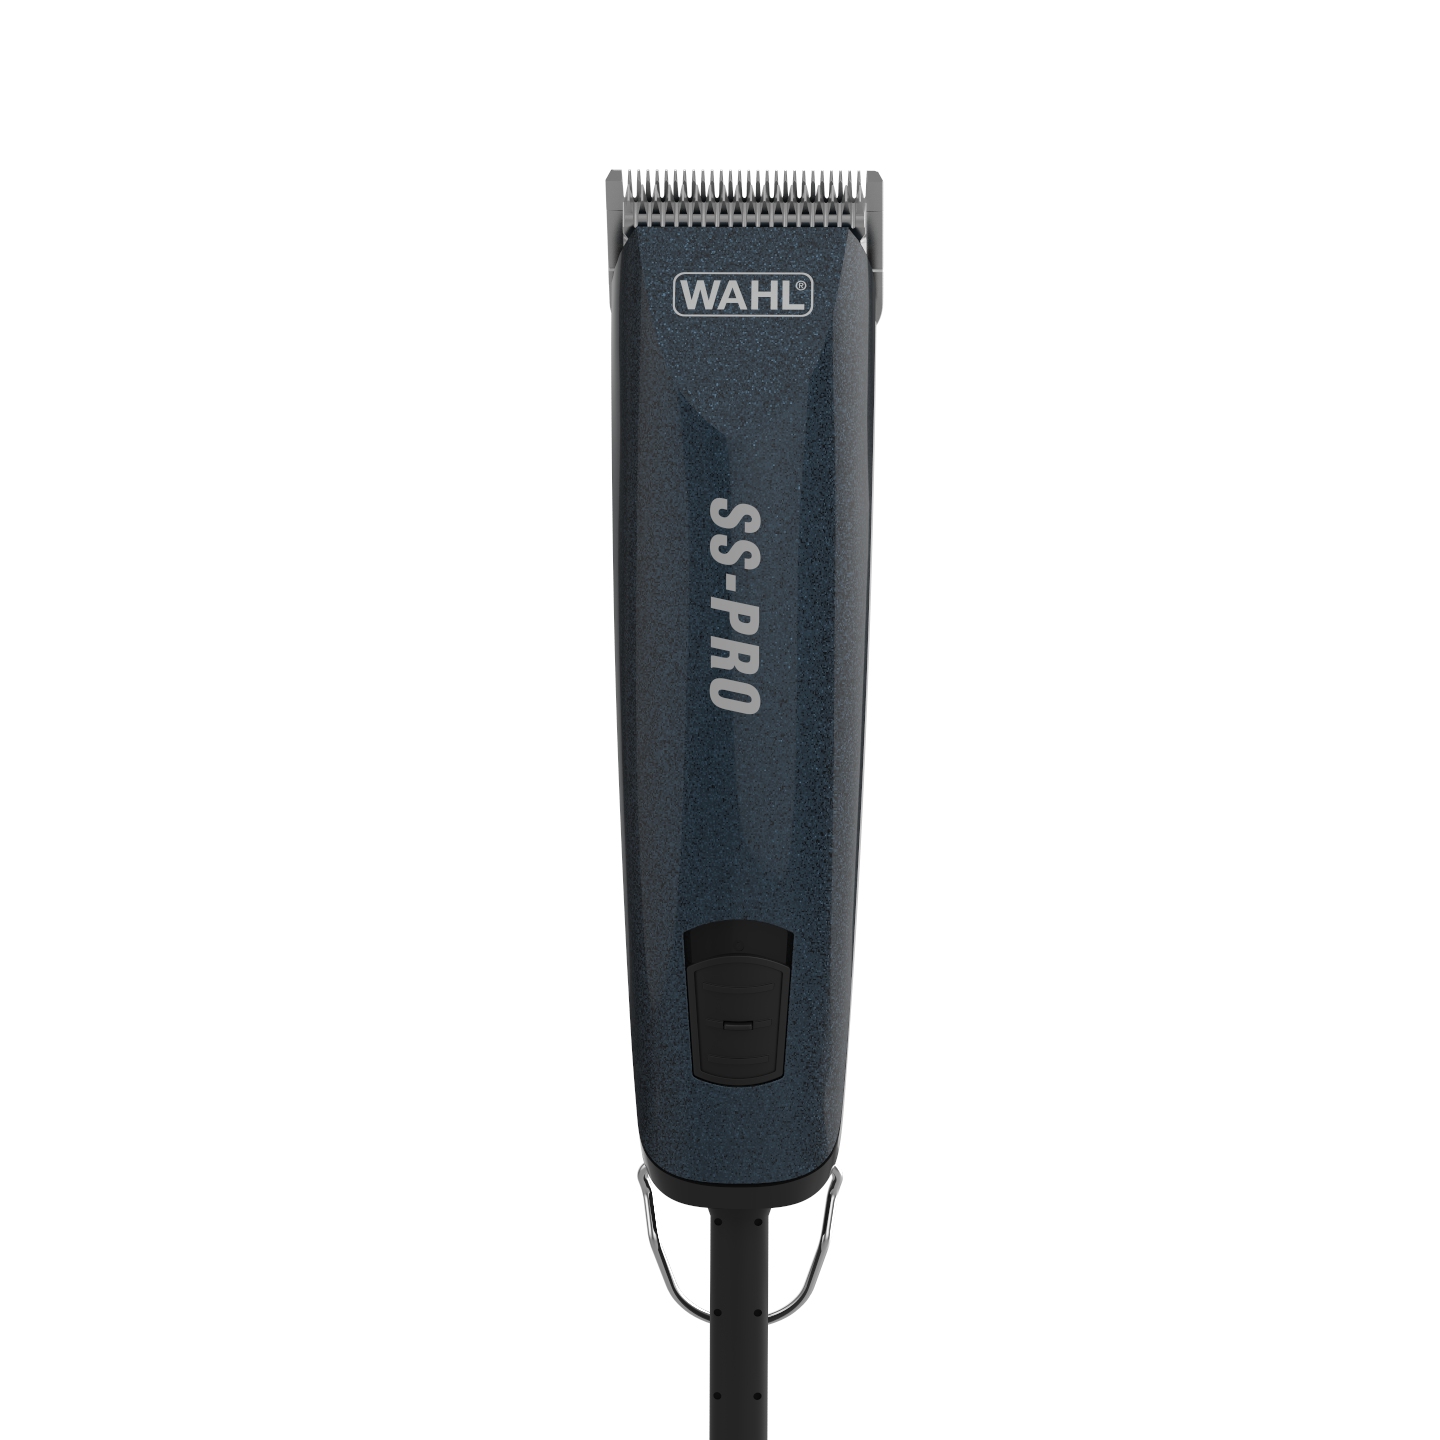 wahl ss pro clippers